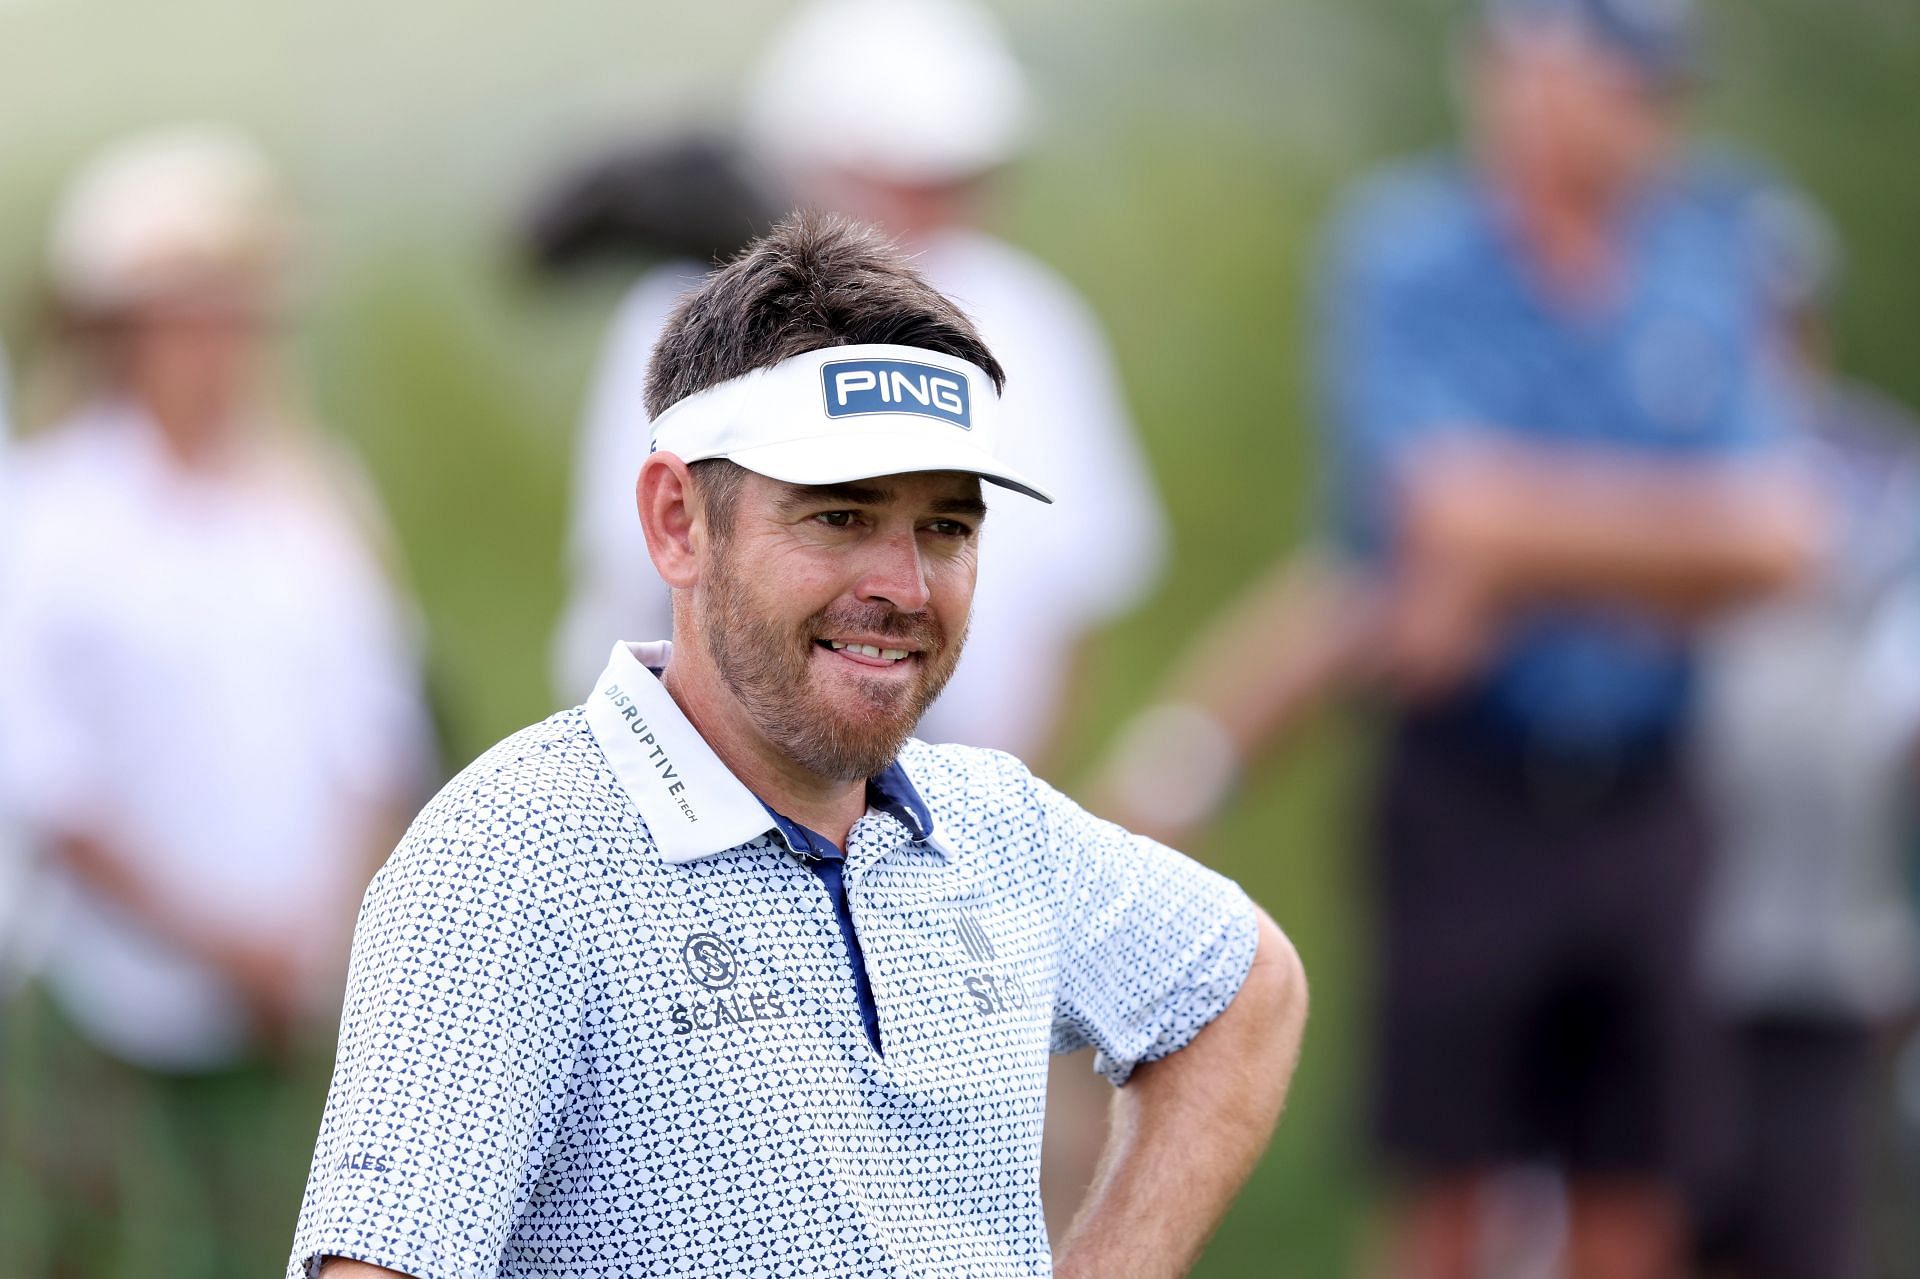 Louis Oosthuizen at the Alfred Dunhill Championship - Day Four (Image via Warren Little/Getty Images)